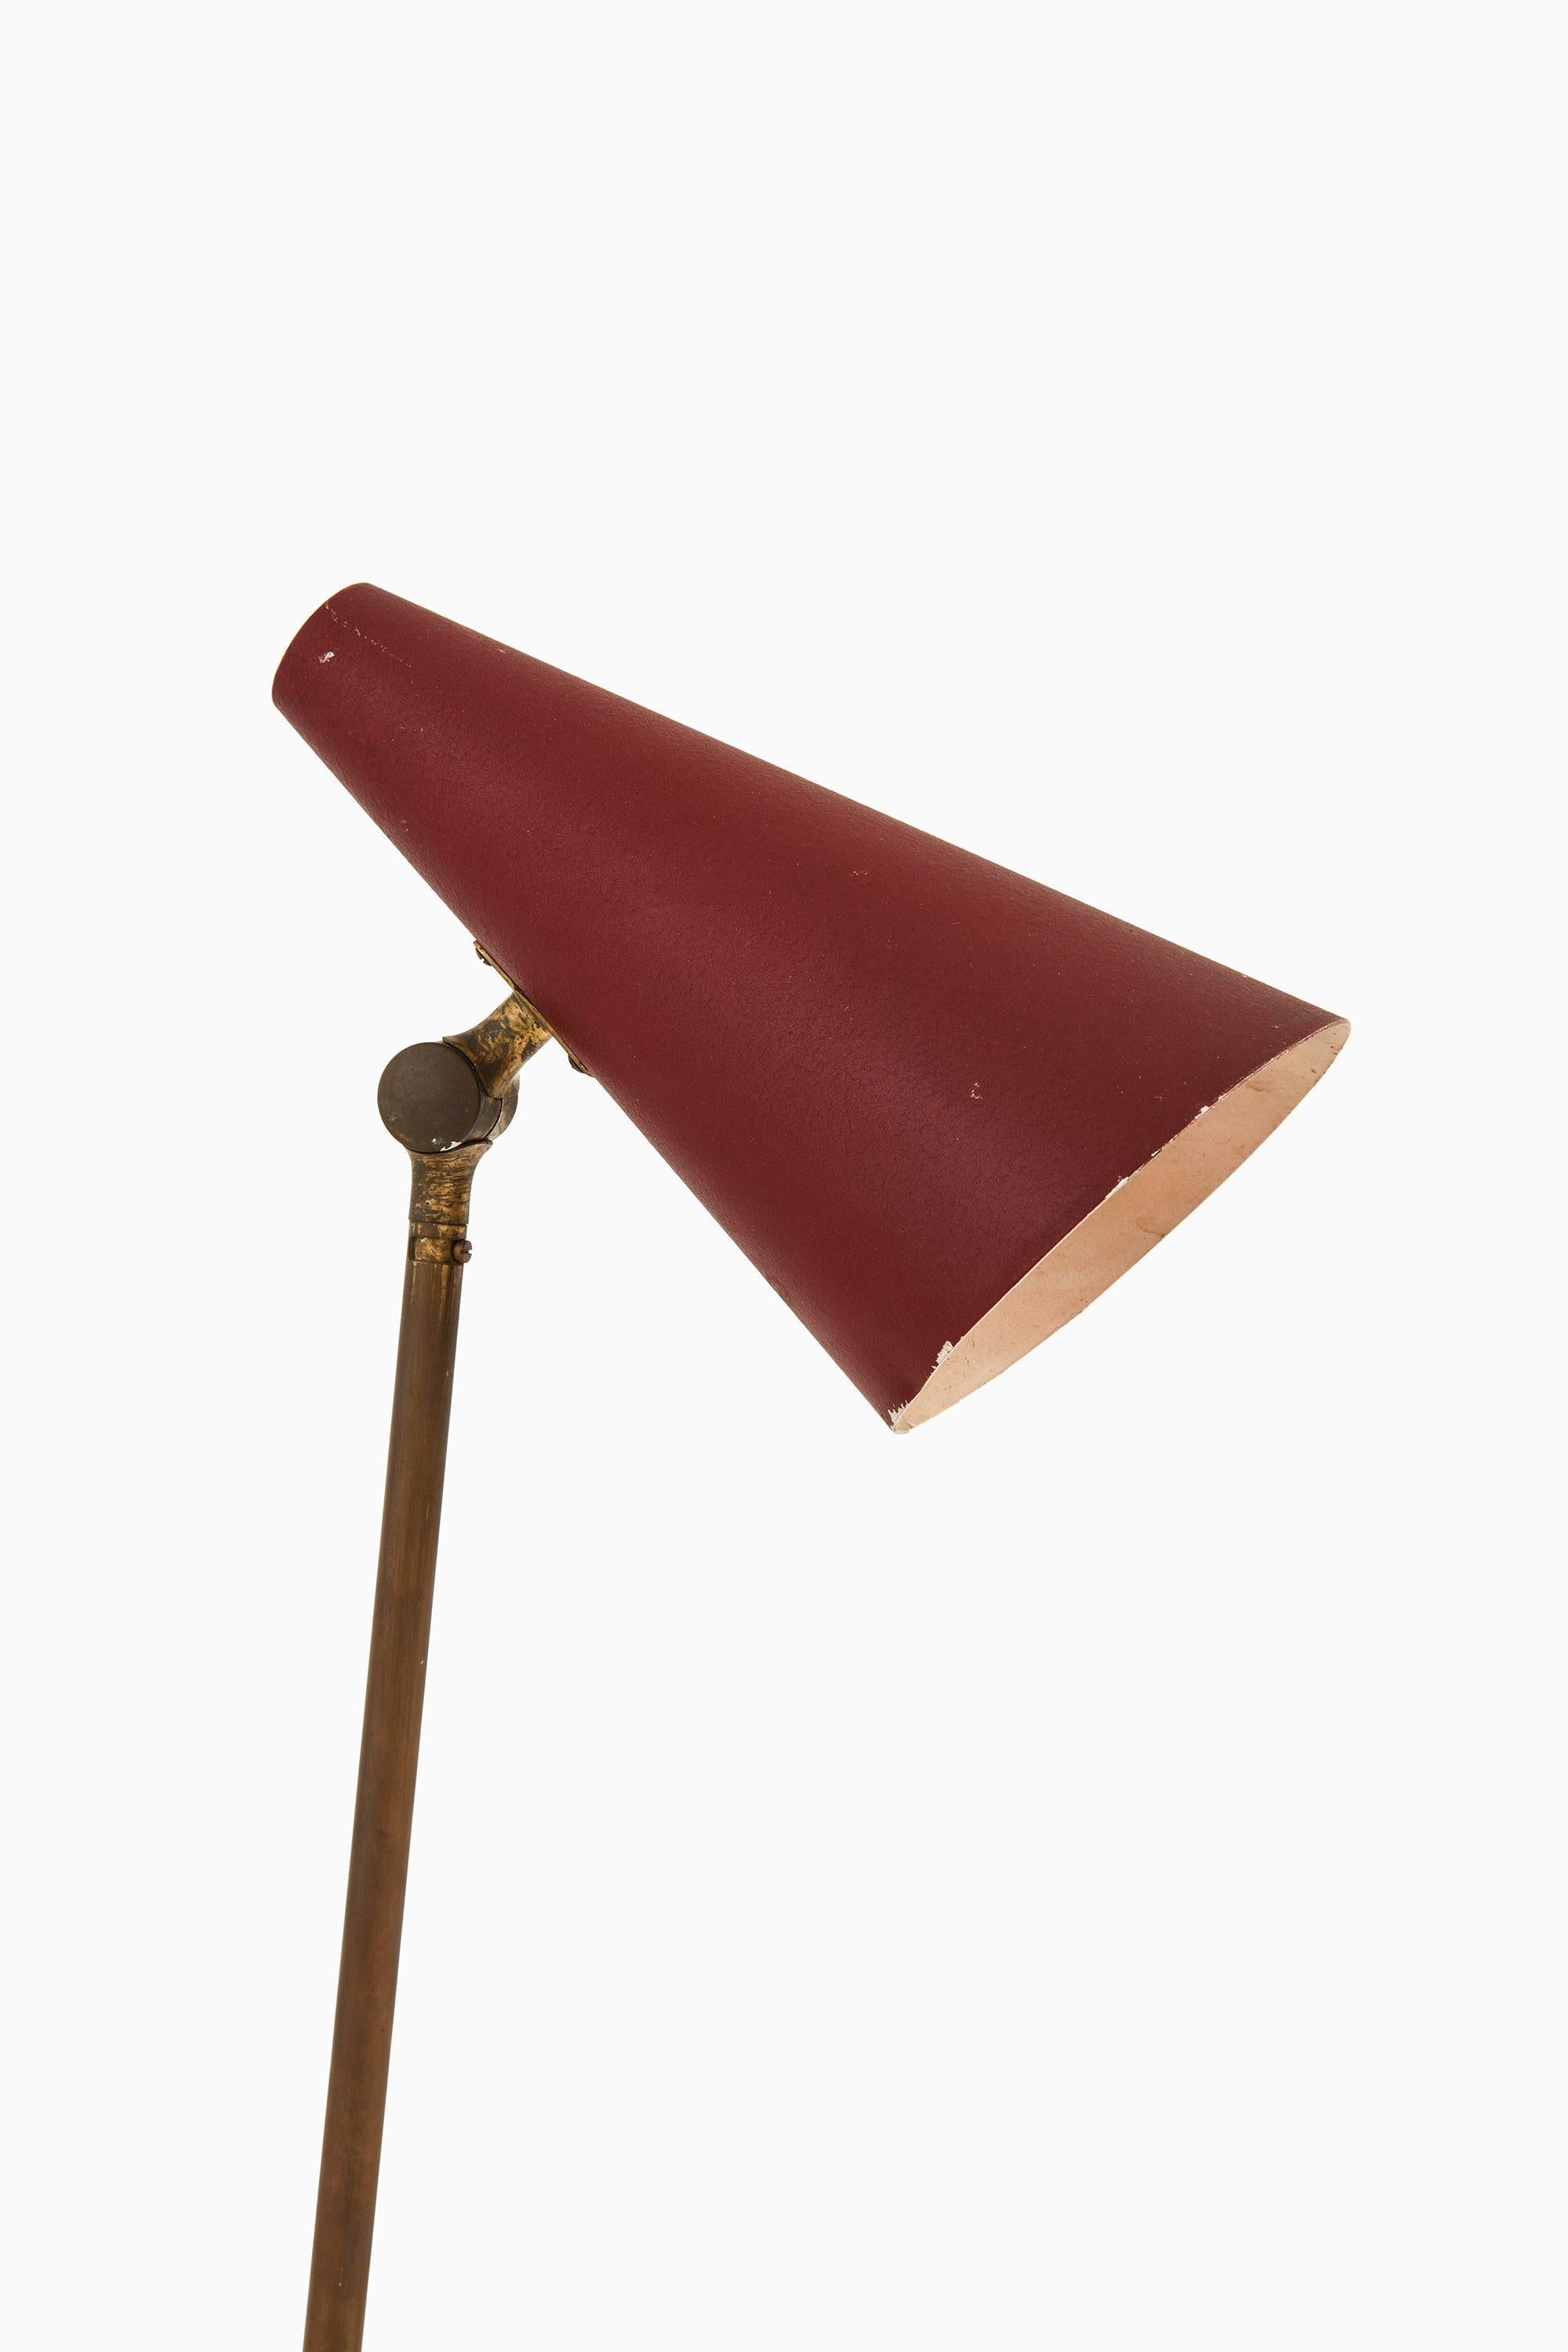 Table Lamp in Brass and Red Lacquered Metal, 1950’s
Designed by Bertil Brisborg and produced by Nordiska Kompaniet in Sweden. 

Additional Information:
Material: Brass and red lacquered metal
Style: Mid century, Scandinavian
Produced by Nordiska